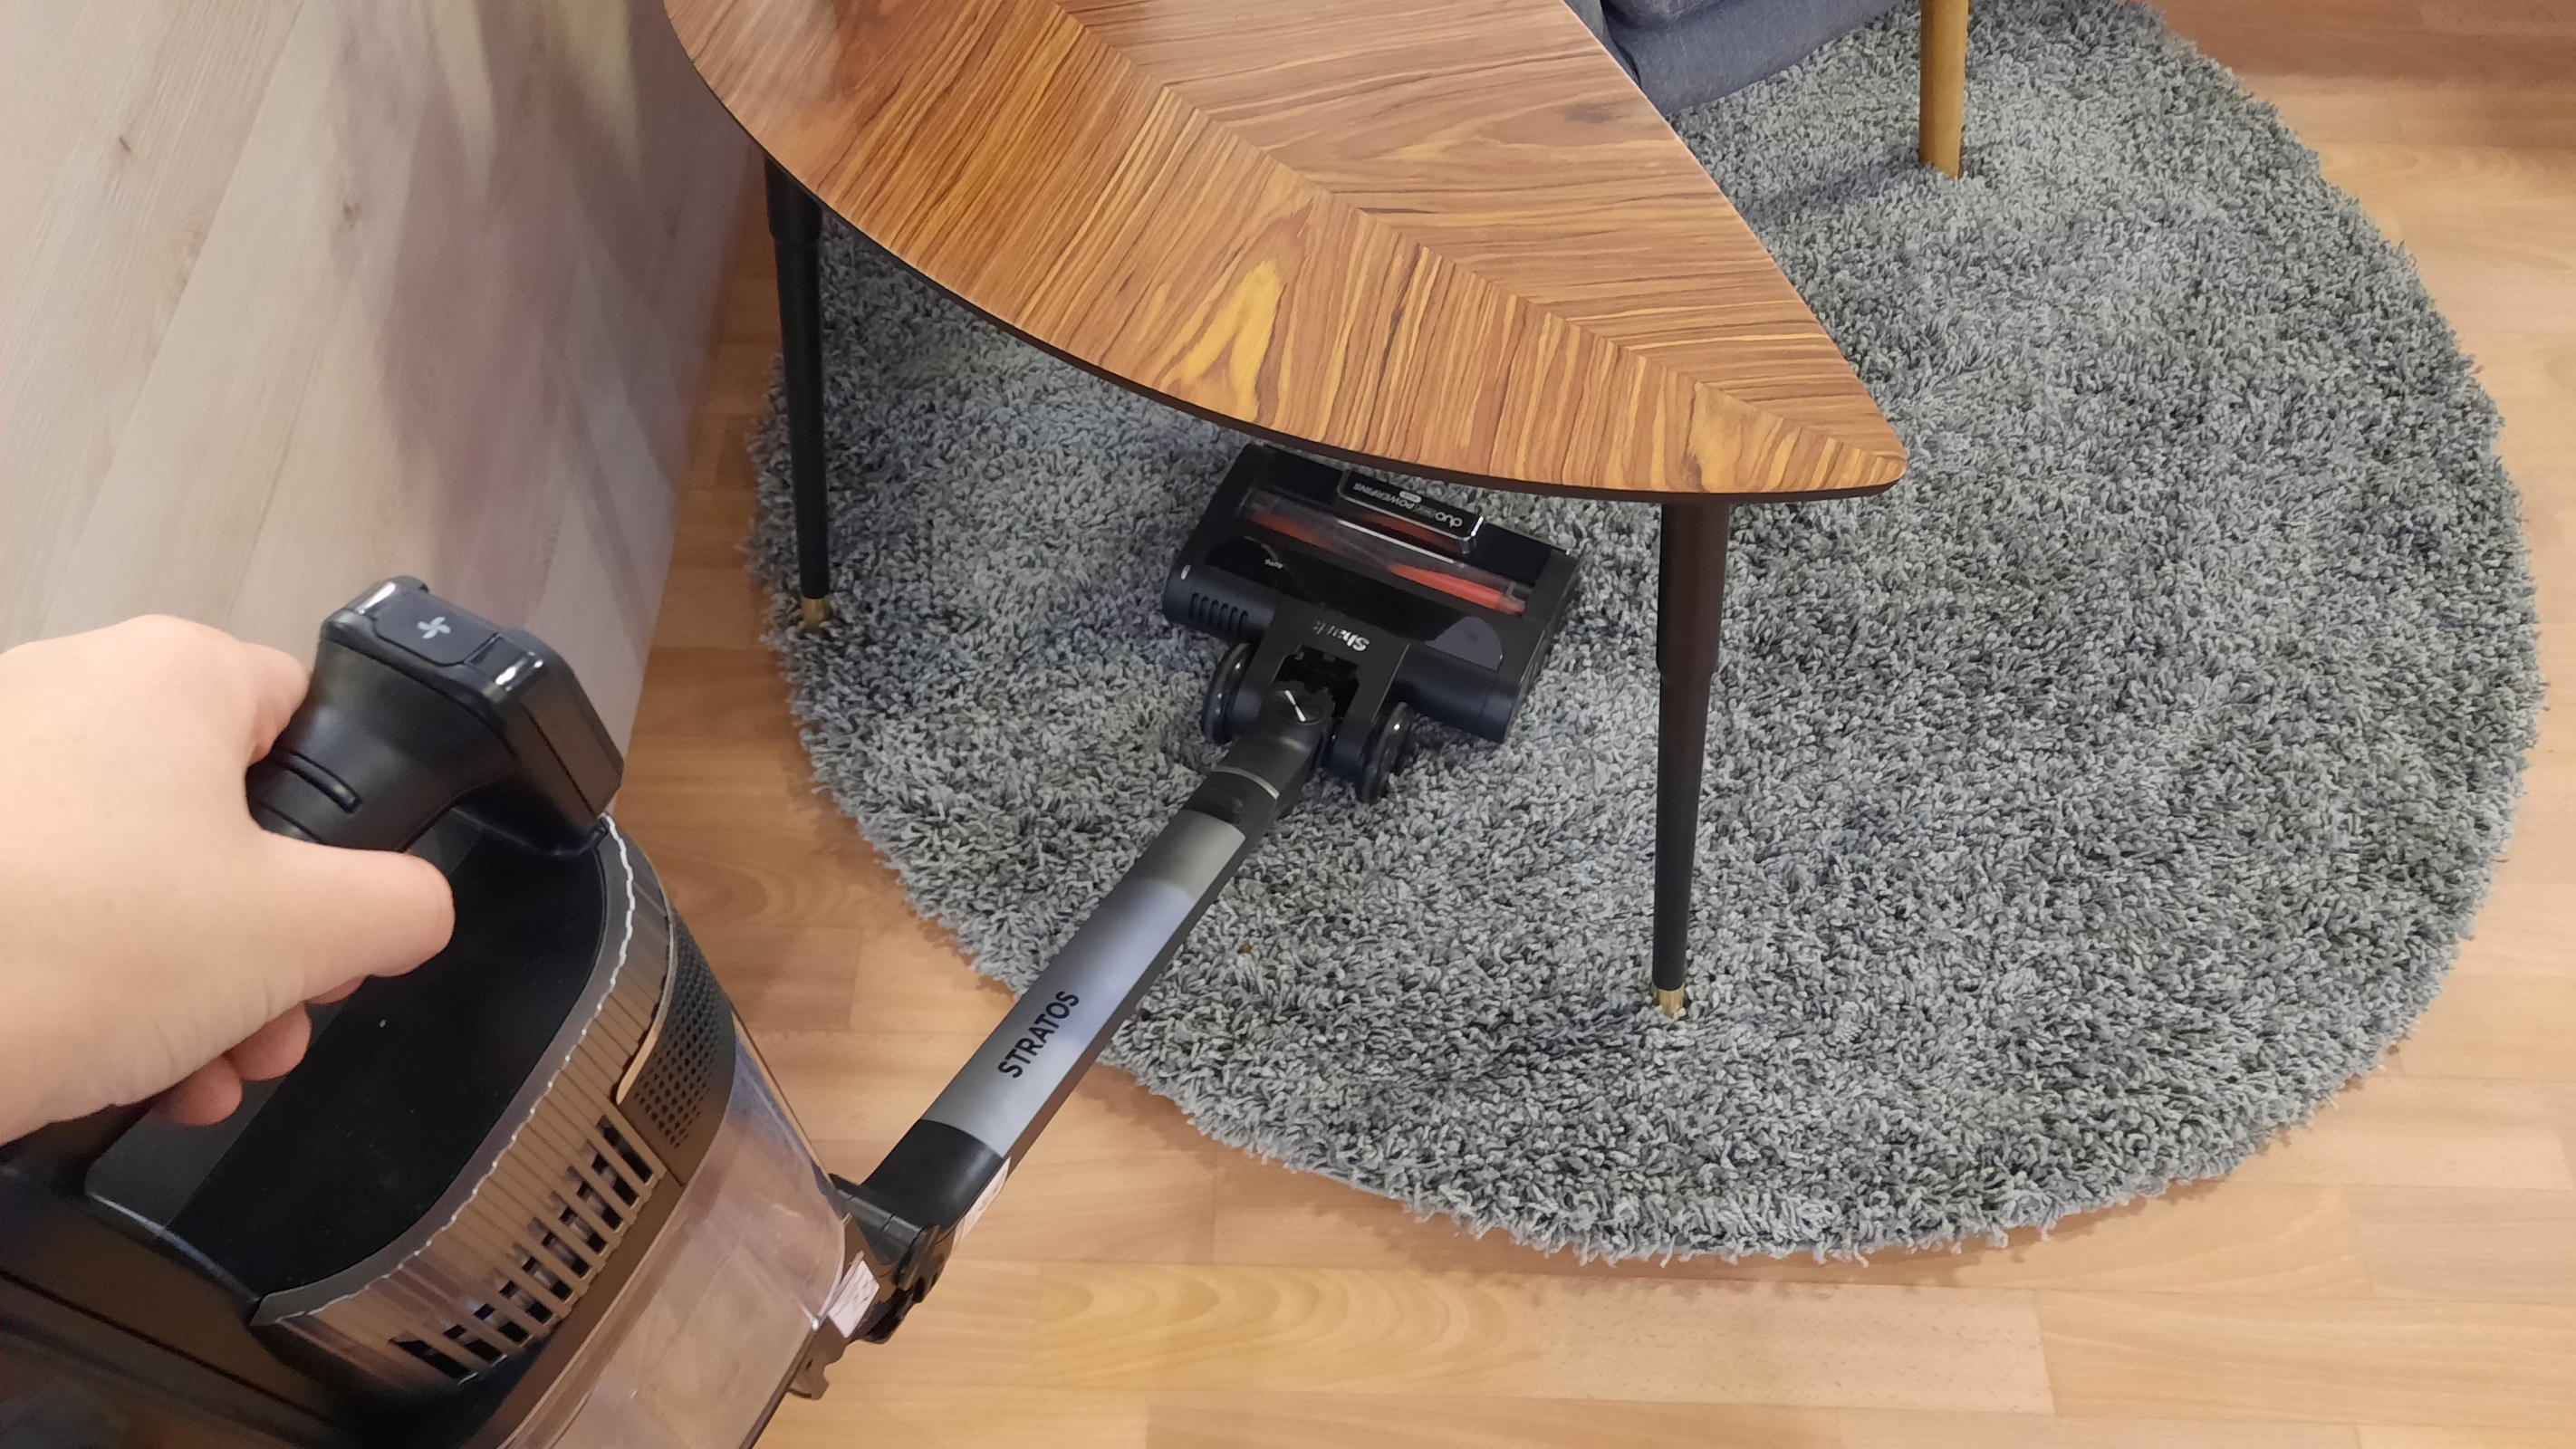 Shark flexology feature is useful for vacuuming under furniture